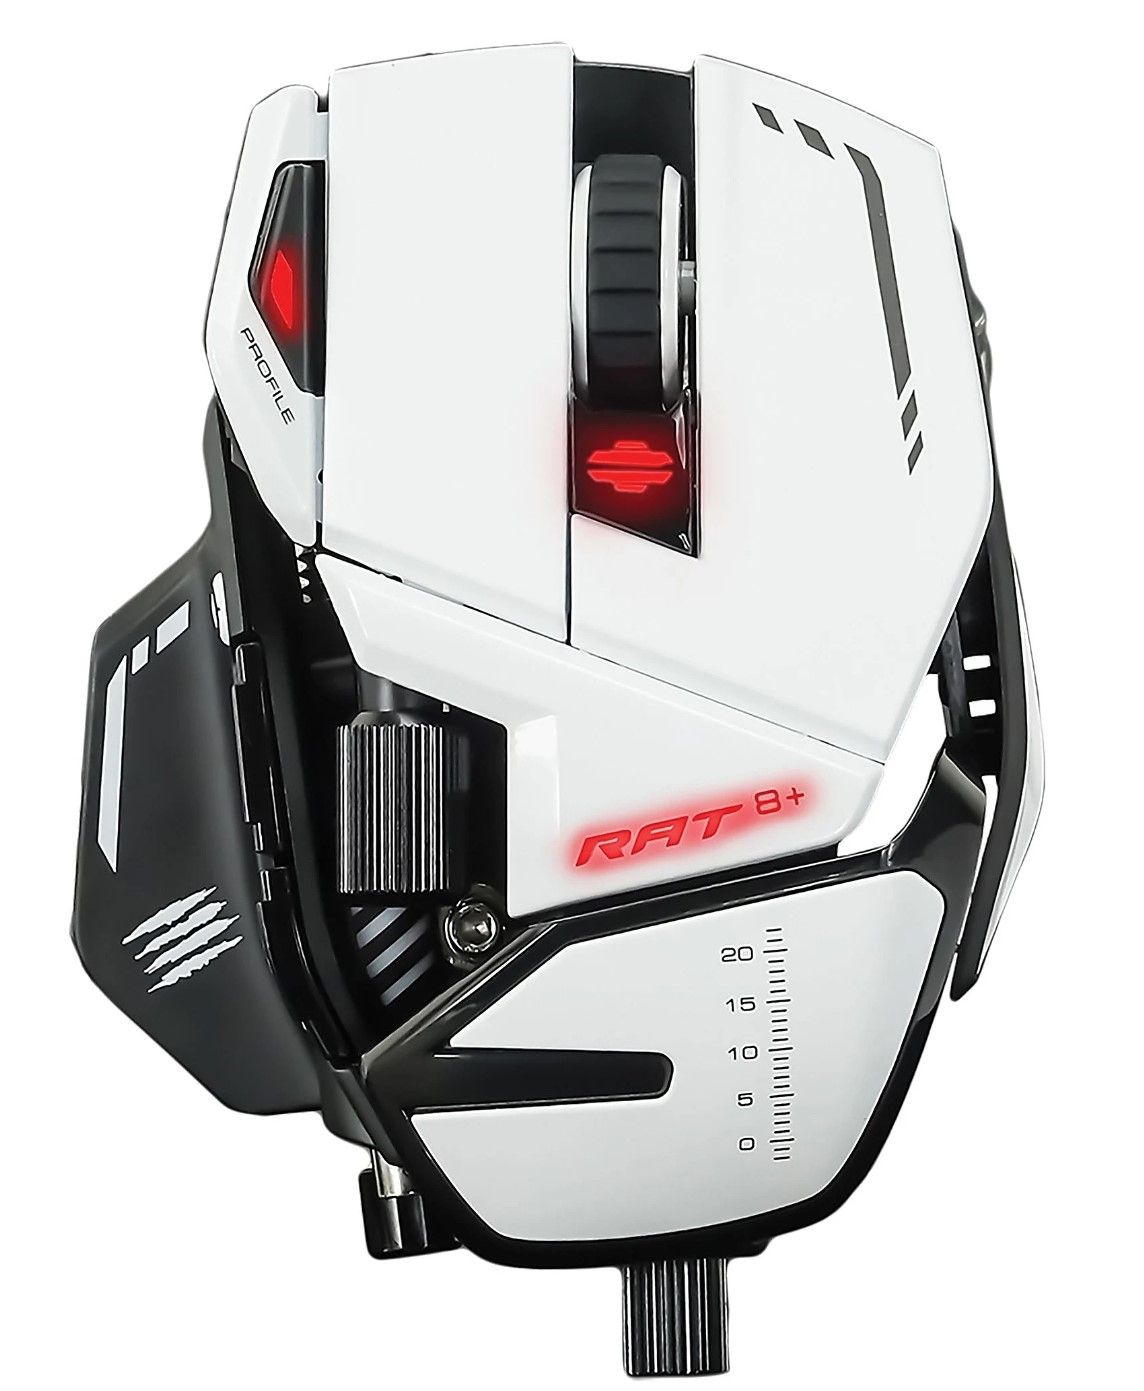 Mad Catz R.A.T. 8+ Adjustable Wired Gaming Mouse 